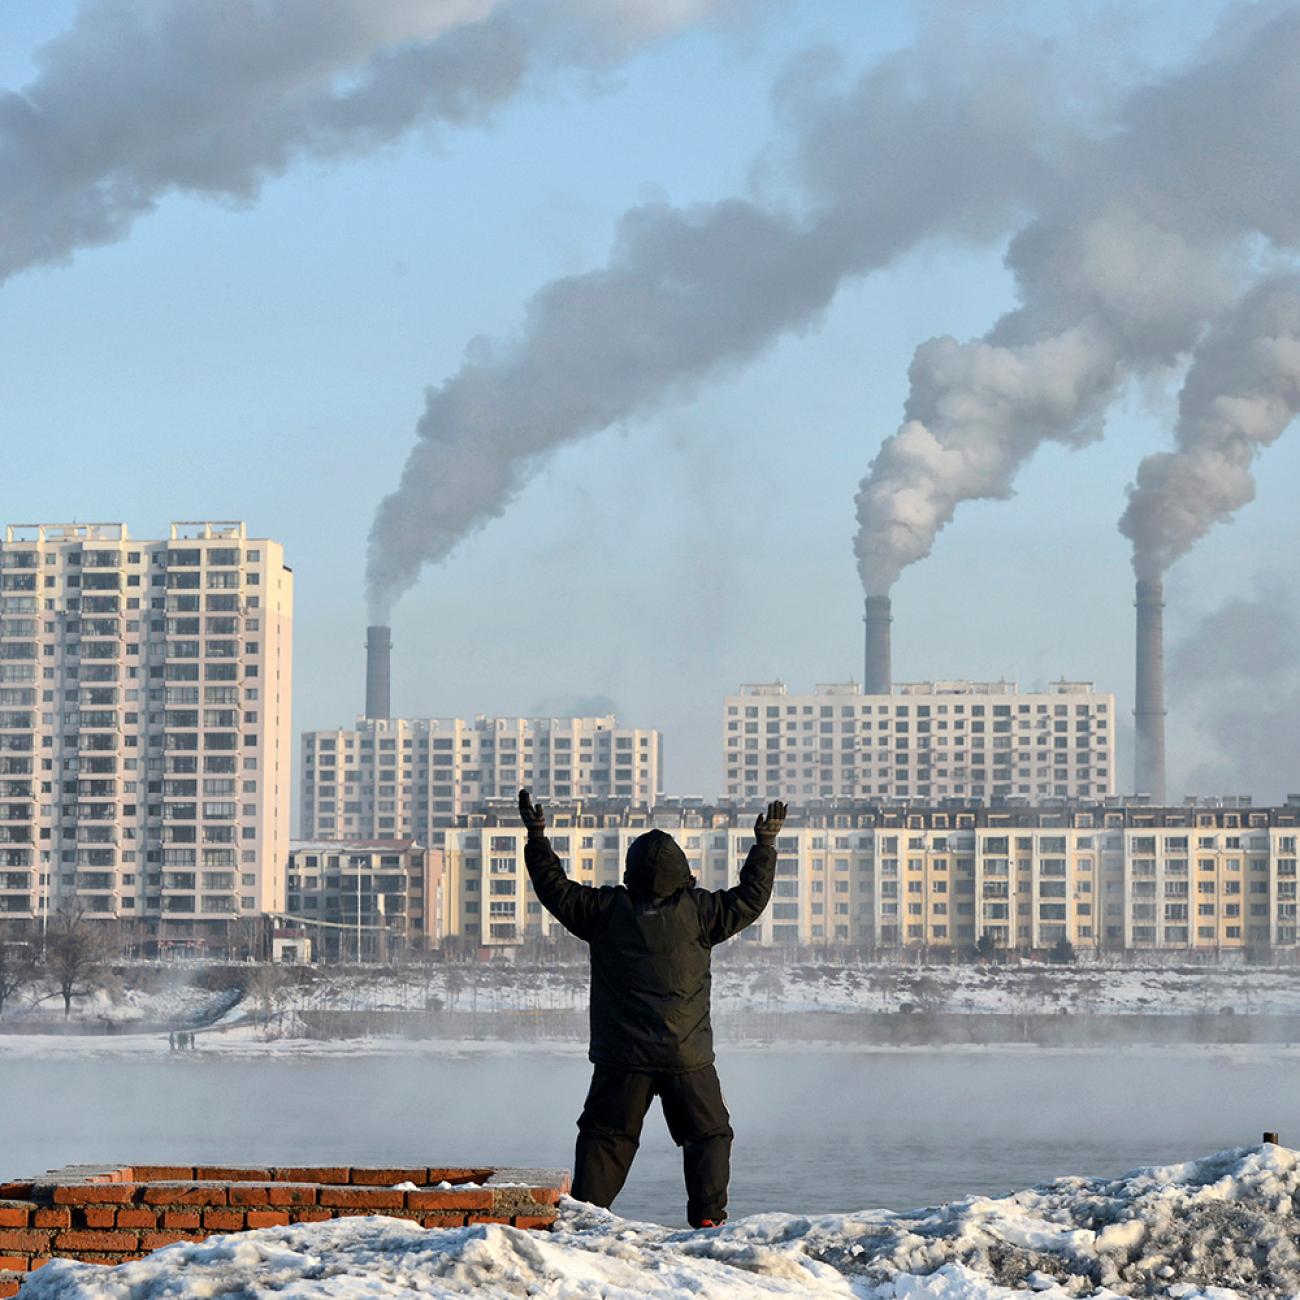 Factories emit smoke in Jilin province, China, across the Songhua River from where an elderly man exercises on the morning of Feb 24, 2013, after Chinese authorities announced plans to curb pollution. The photo shows the man in the foreground, back to the camera, with buildings on the other side of the river pouring out smoke. REUTERS/Stringer